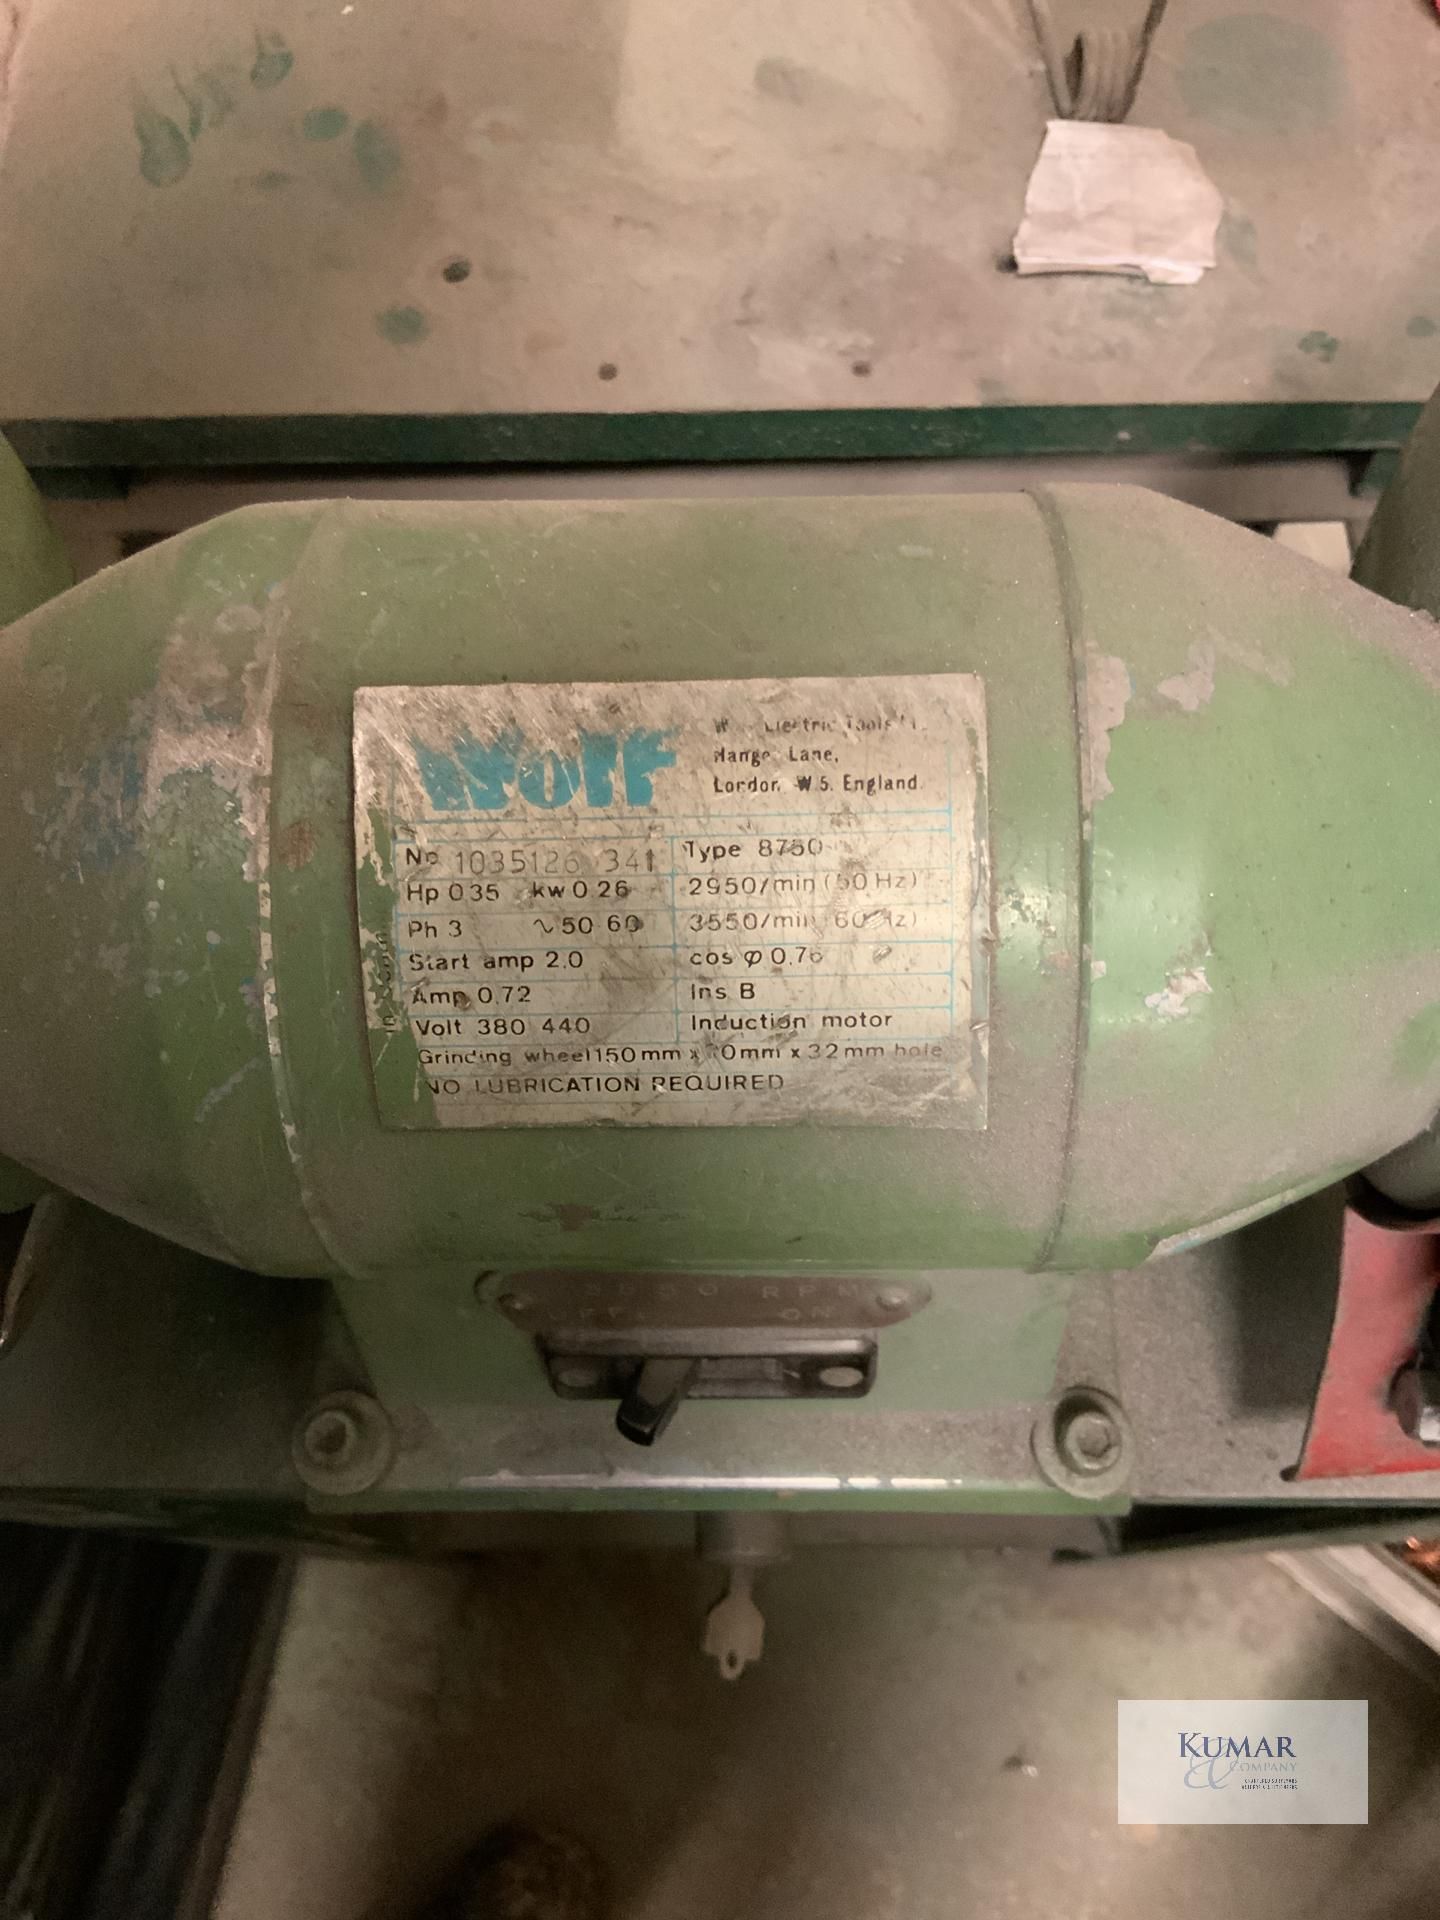 Wolf twin head bench grinder and stand . Model 8750 . Serial number 1035126341 Collection Day – - Image 2 of 3